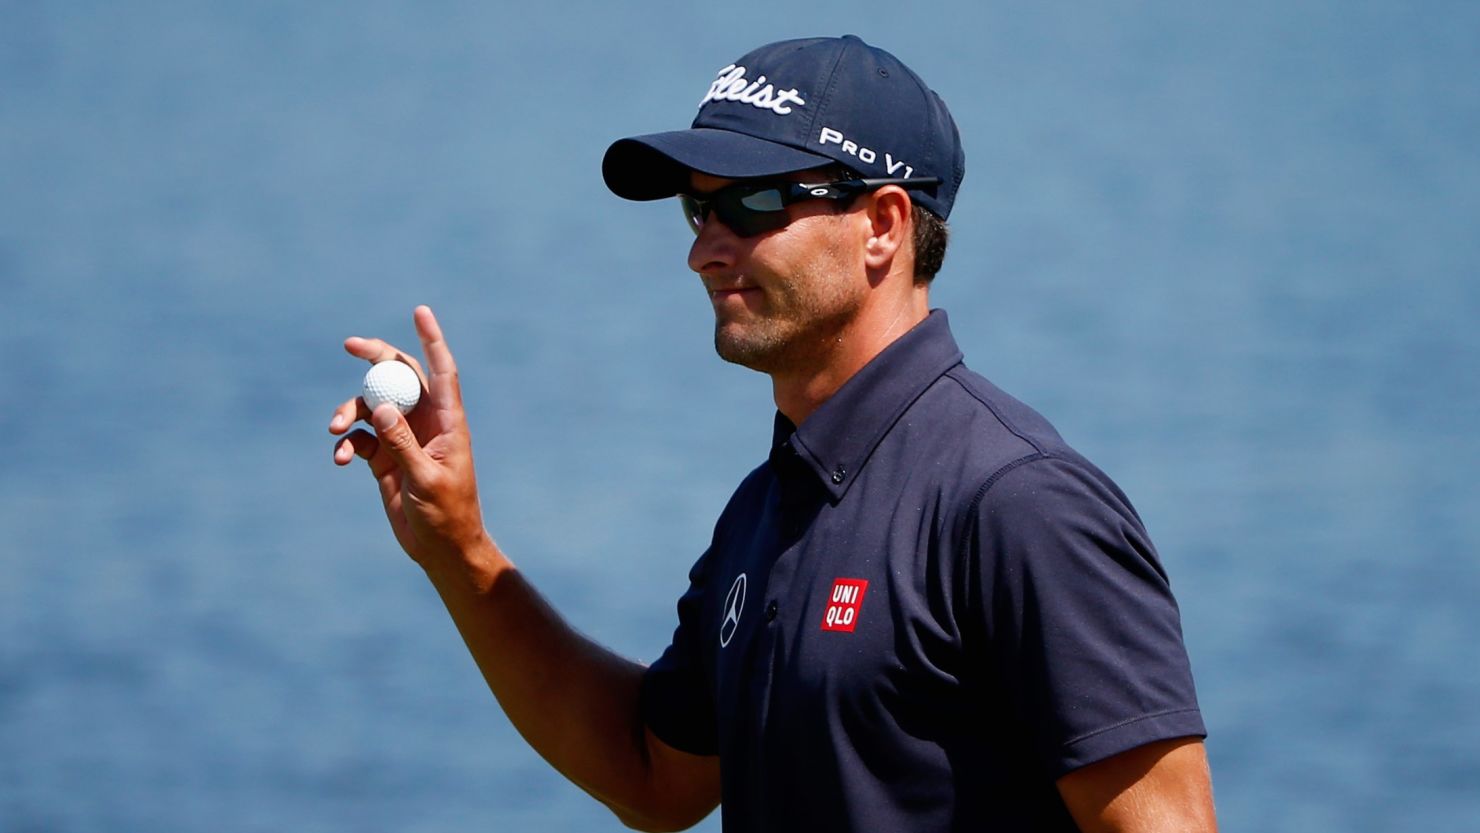 Masters champion Adam Scott tied the course record with an opening round of 62.